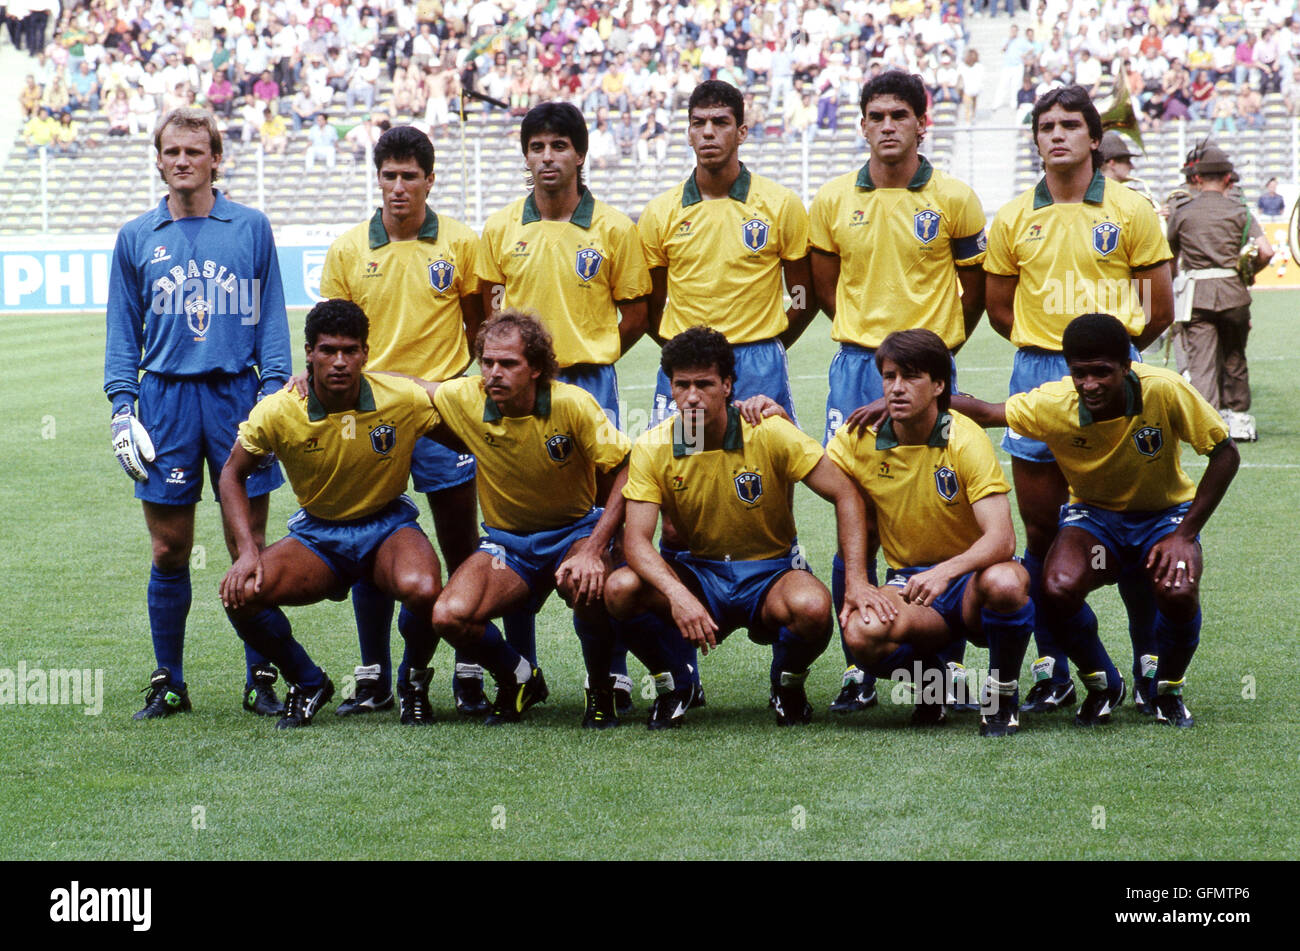 Brazil team group line-up (BRA), JUNE 16, 1990 - Football / Soccer : Brazil team group shot (Top row - L to R) Taffarel, Jorginho, Mauro Galvao, Mozer, Ricardo Gomes, Branco, (Bottom row - L to R) Muller, Alemao, Careca, Dunga and Valdo before the 1990 FIFA World Cup Italy Group C match between Brazil 1-0 Costa Rica at Stadio delle Alpi in Turin, Italy. (Photo by Juha Tamminen/AFLO) (Minumum pricing : EUR100 per picture) Stock Photo